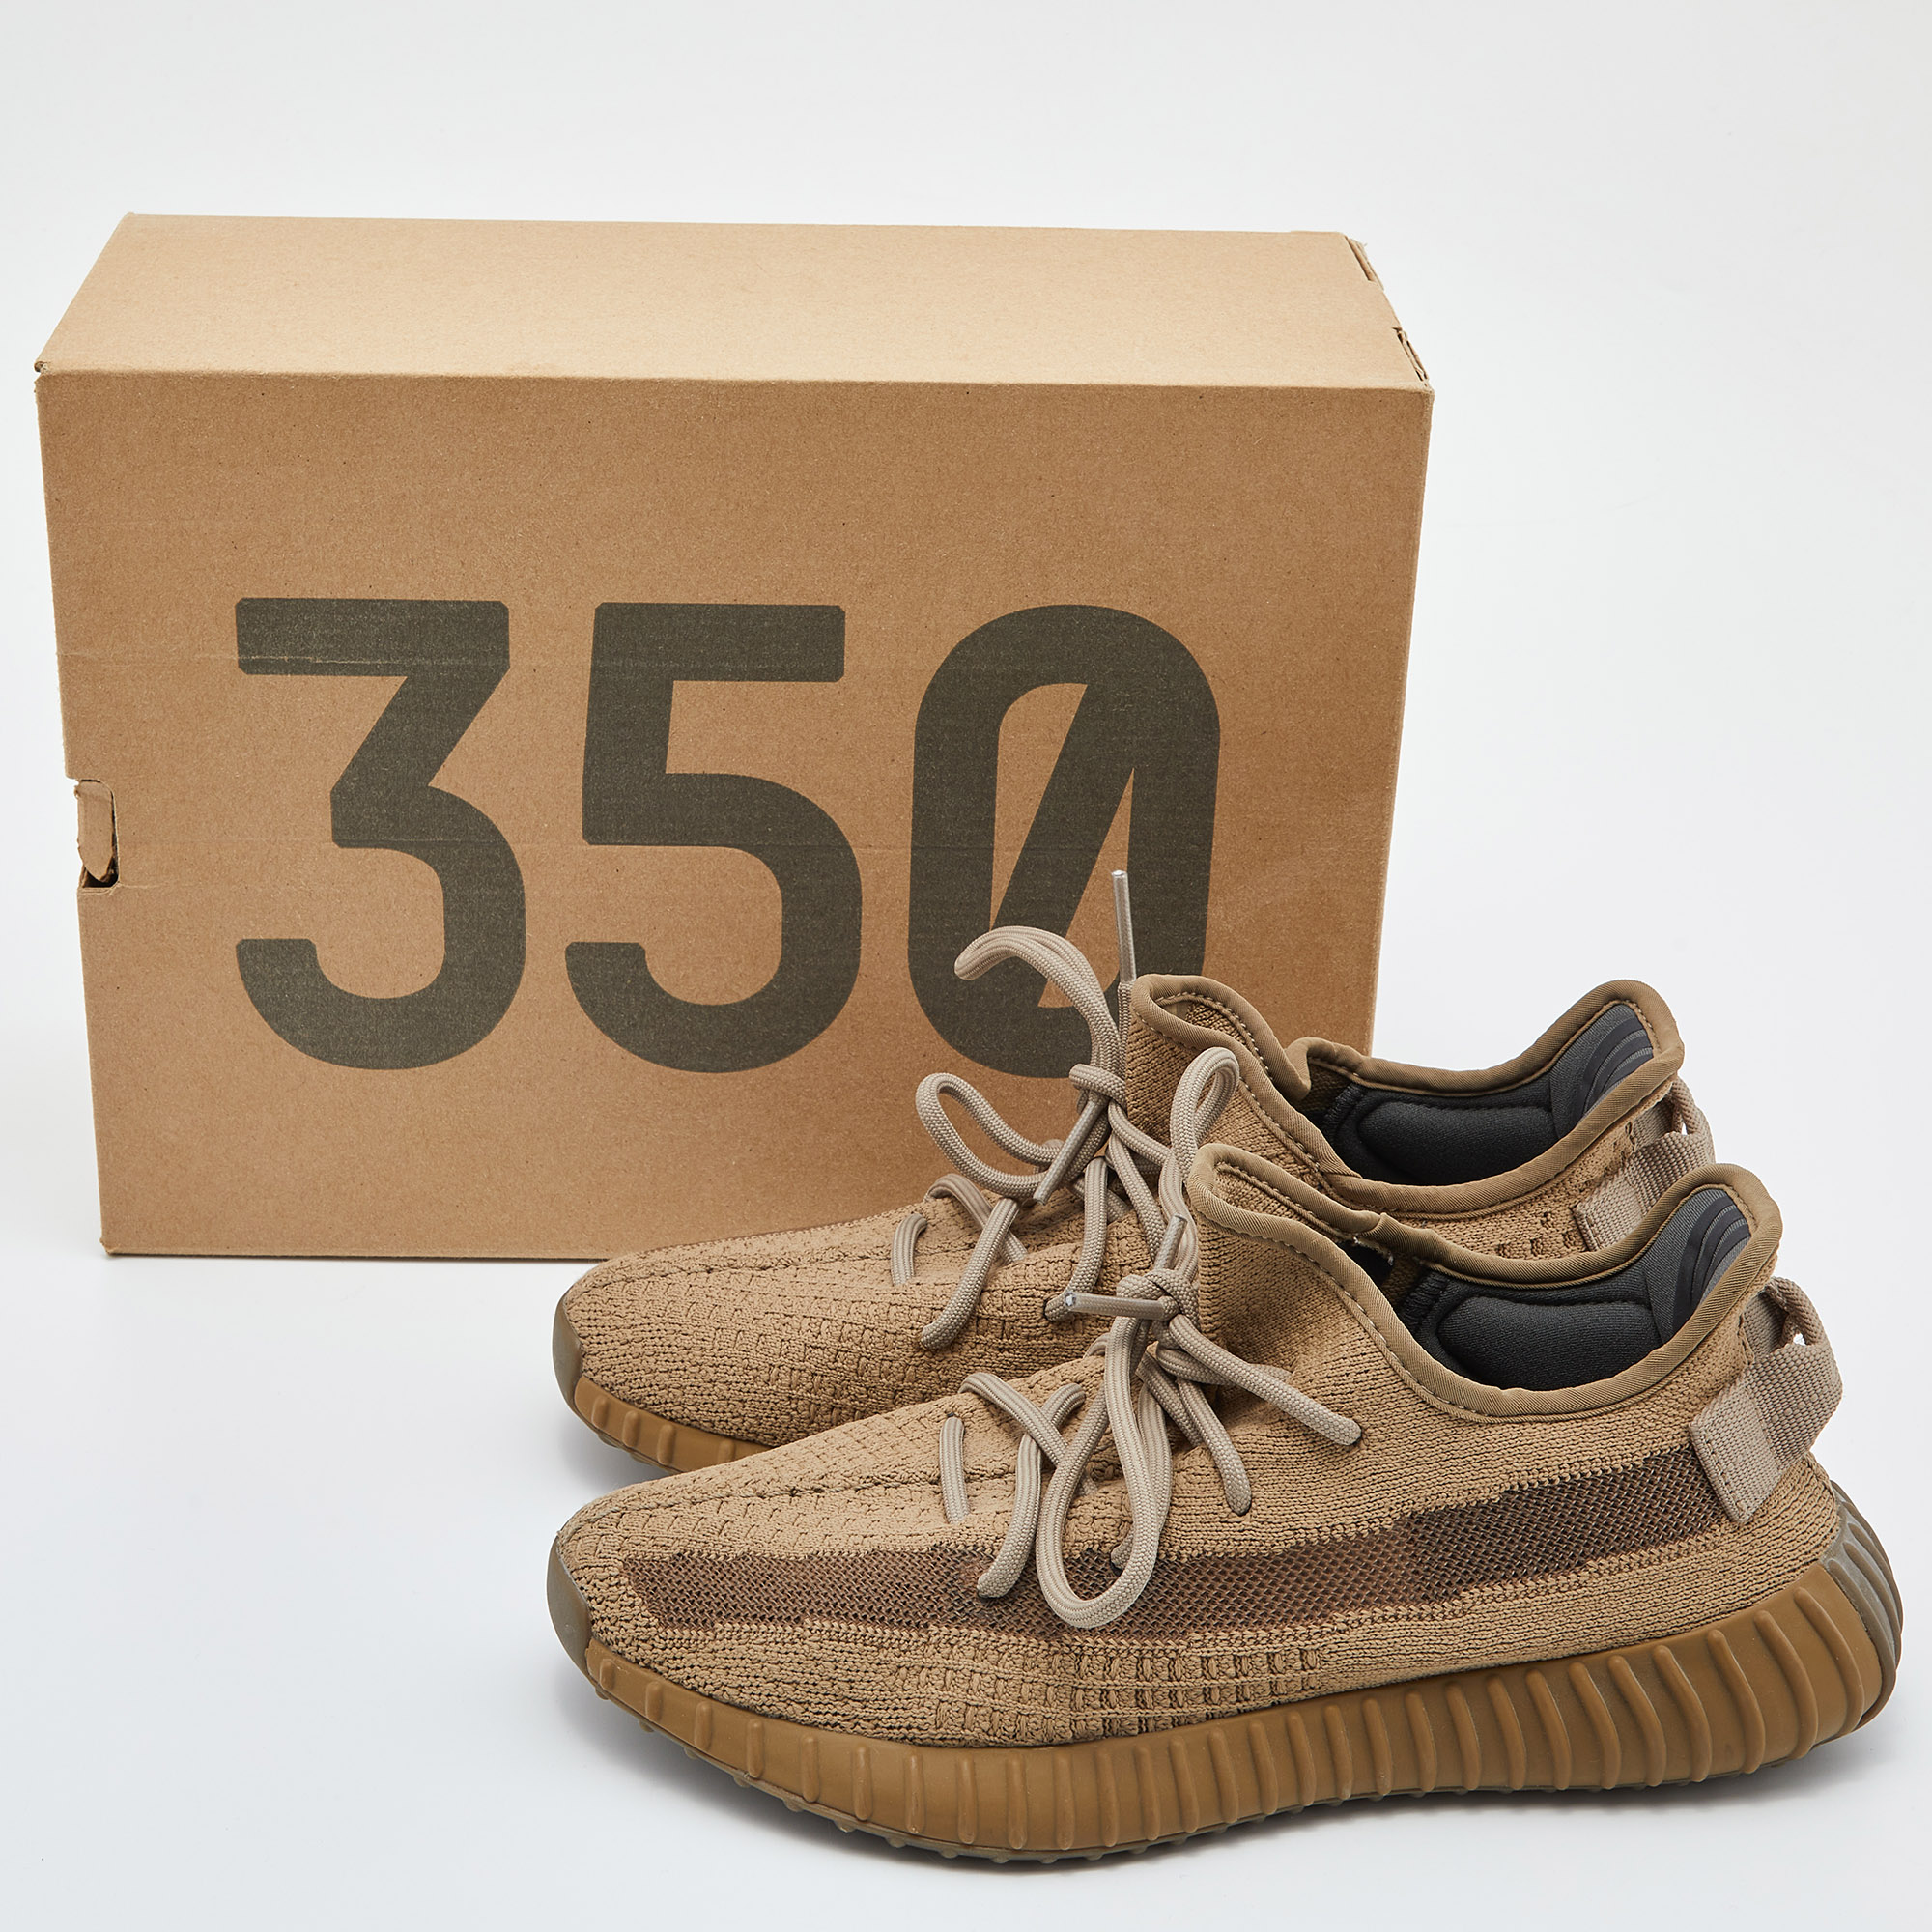 Yeezy X Adidas Brown Knit Fabric Boost 350 V2 Earth Sneakers Size 39 1/3